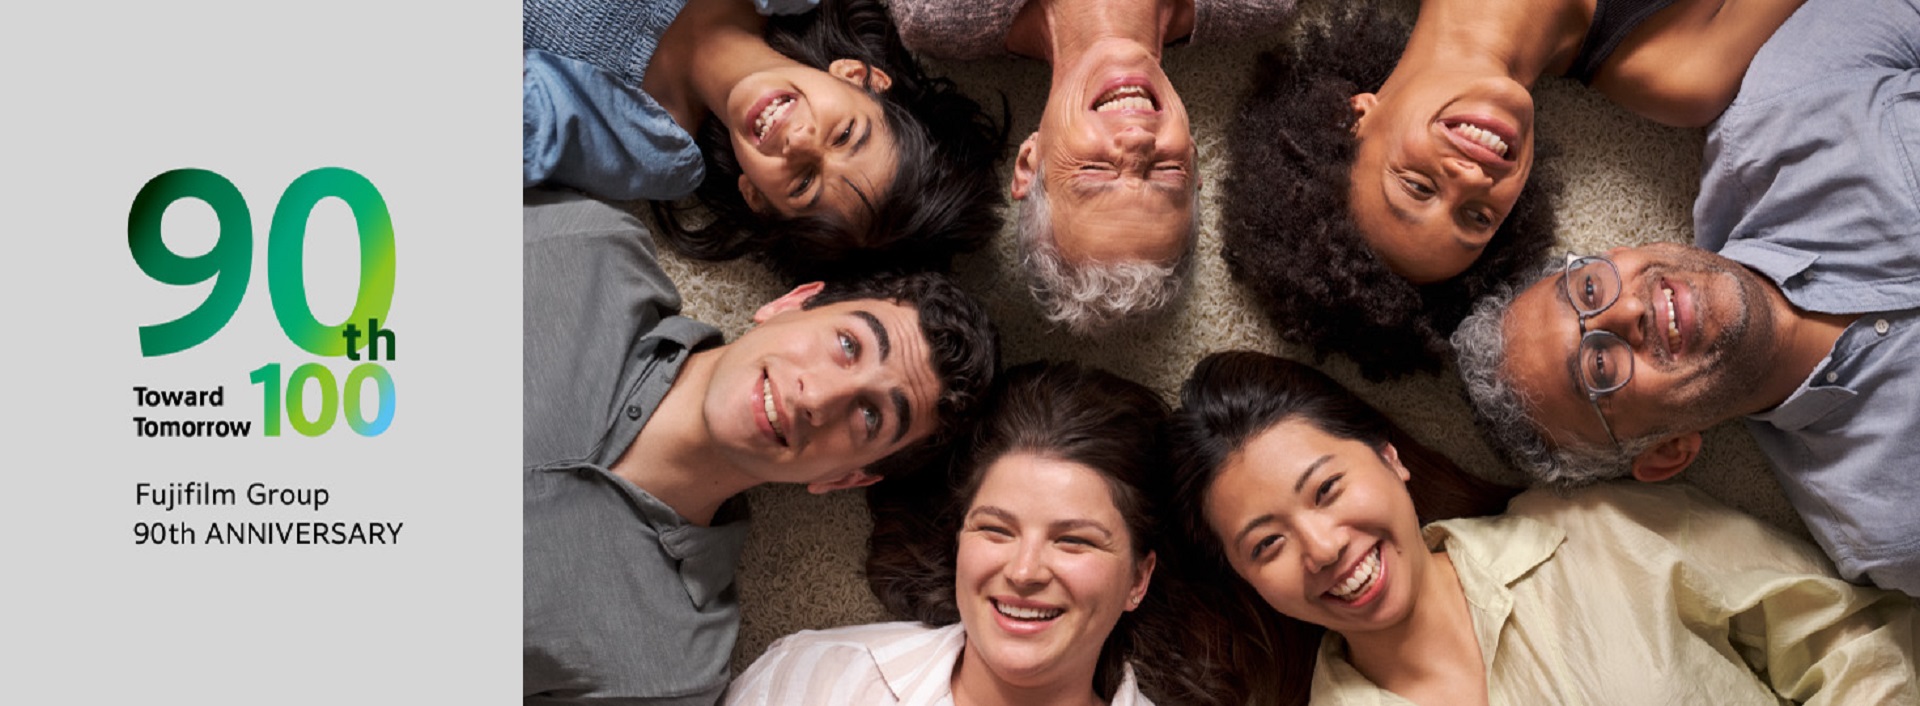 A diverse group of people gathering with smiles, lying down and looking up